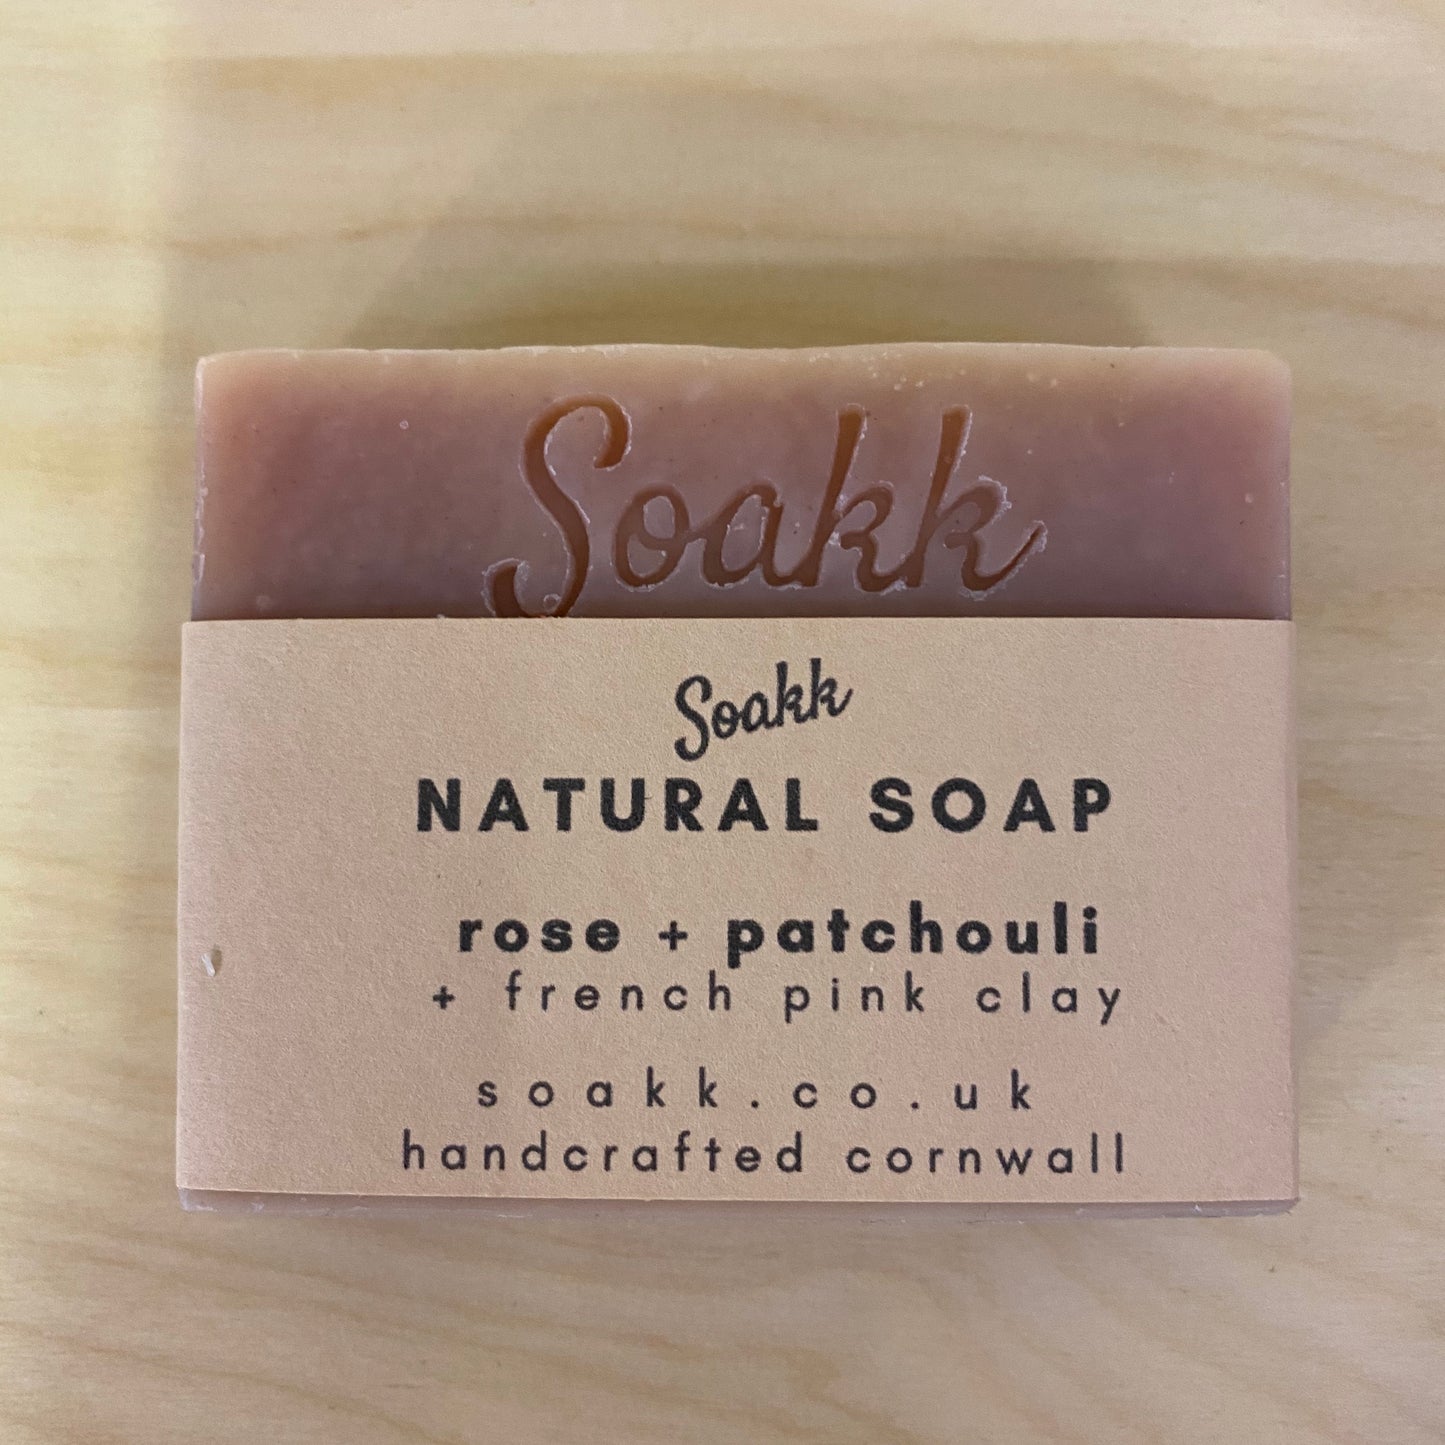 Rose + Patchouli + French Pink Clay Natural soap